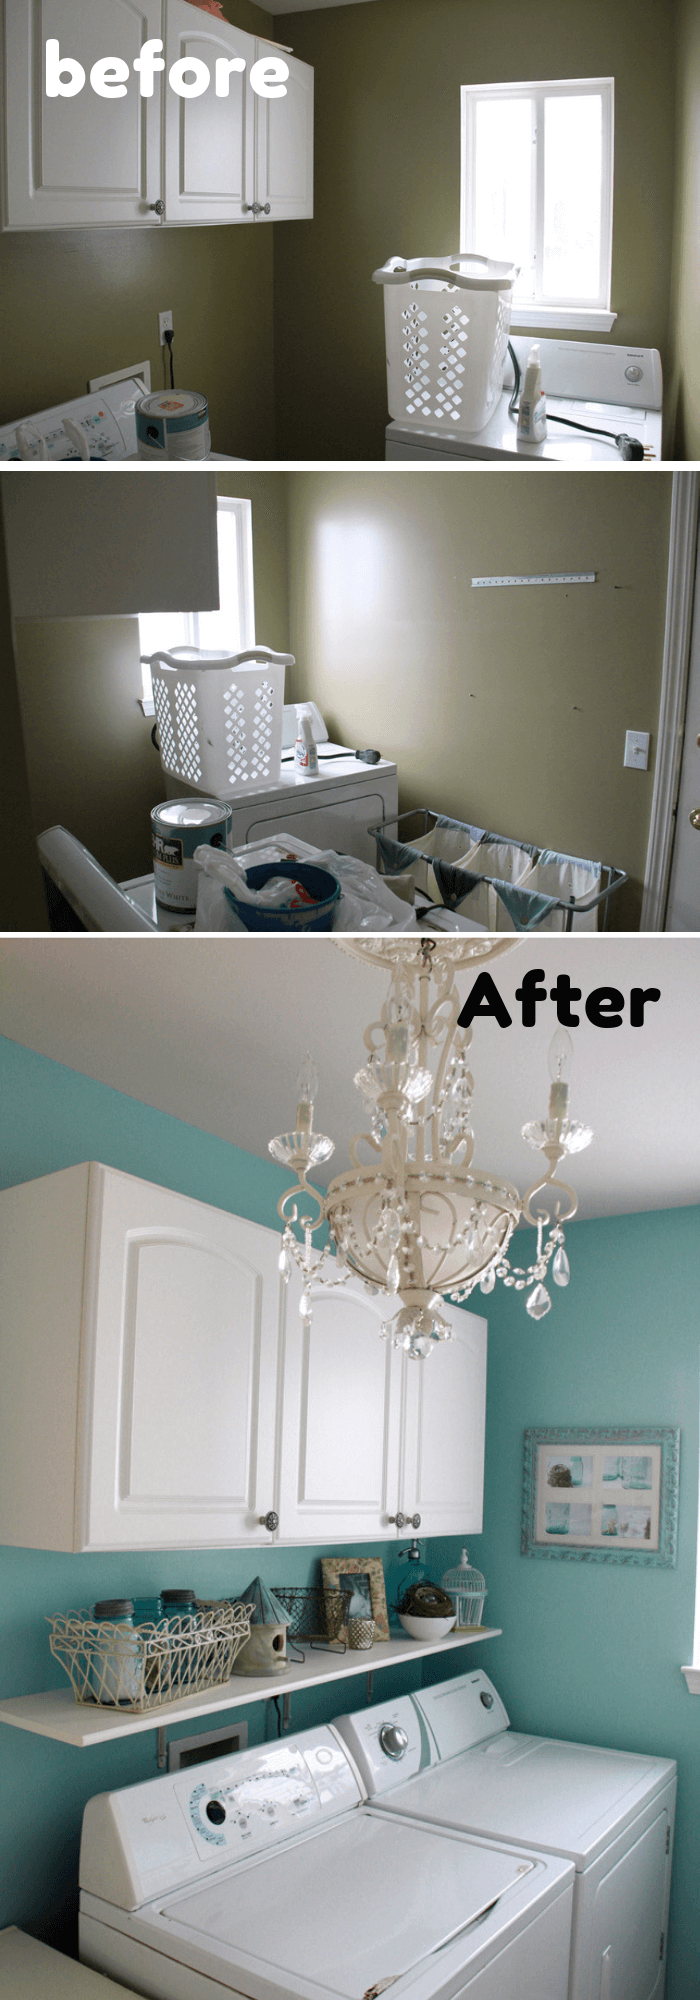 Fairytale Turquoise Laundry Room with a Light Fixture